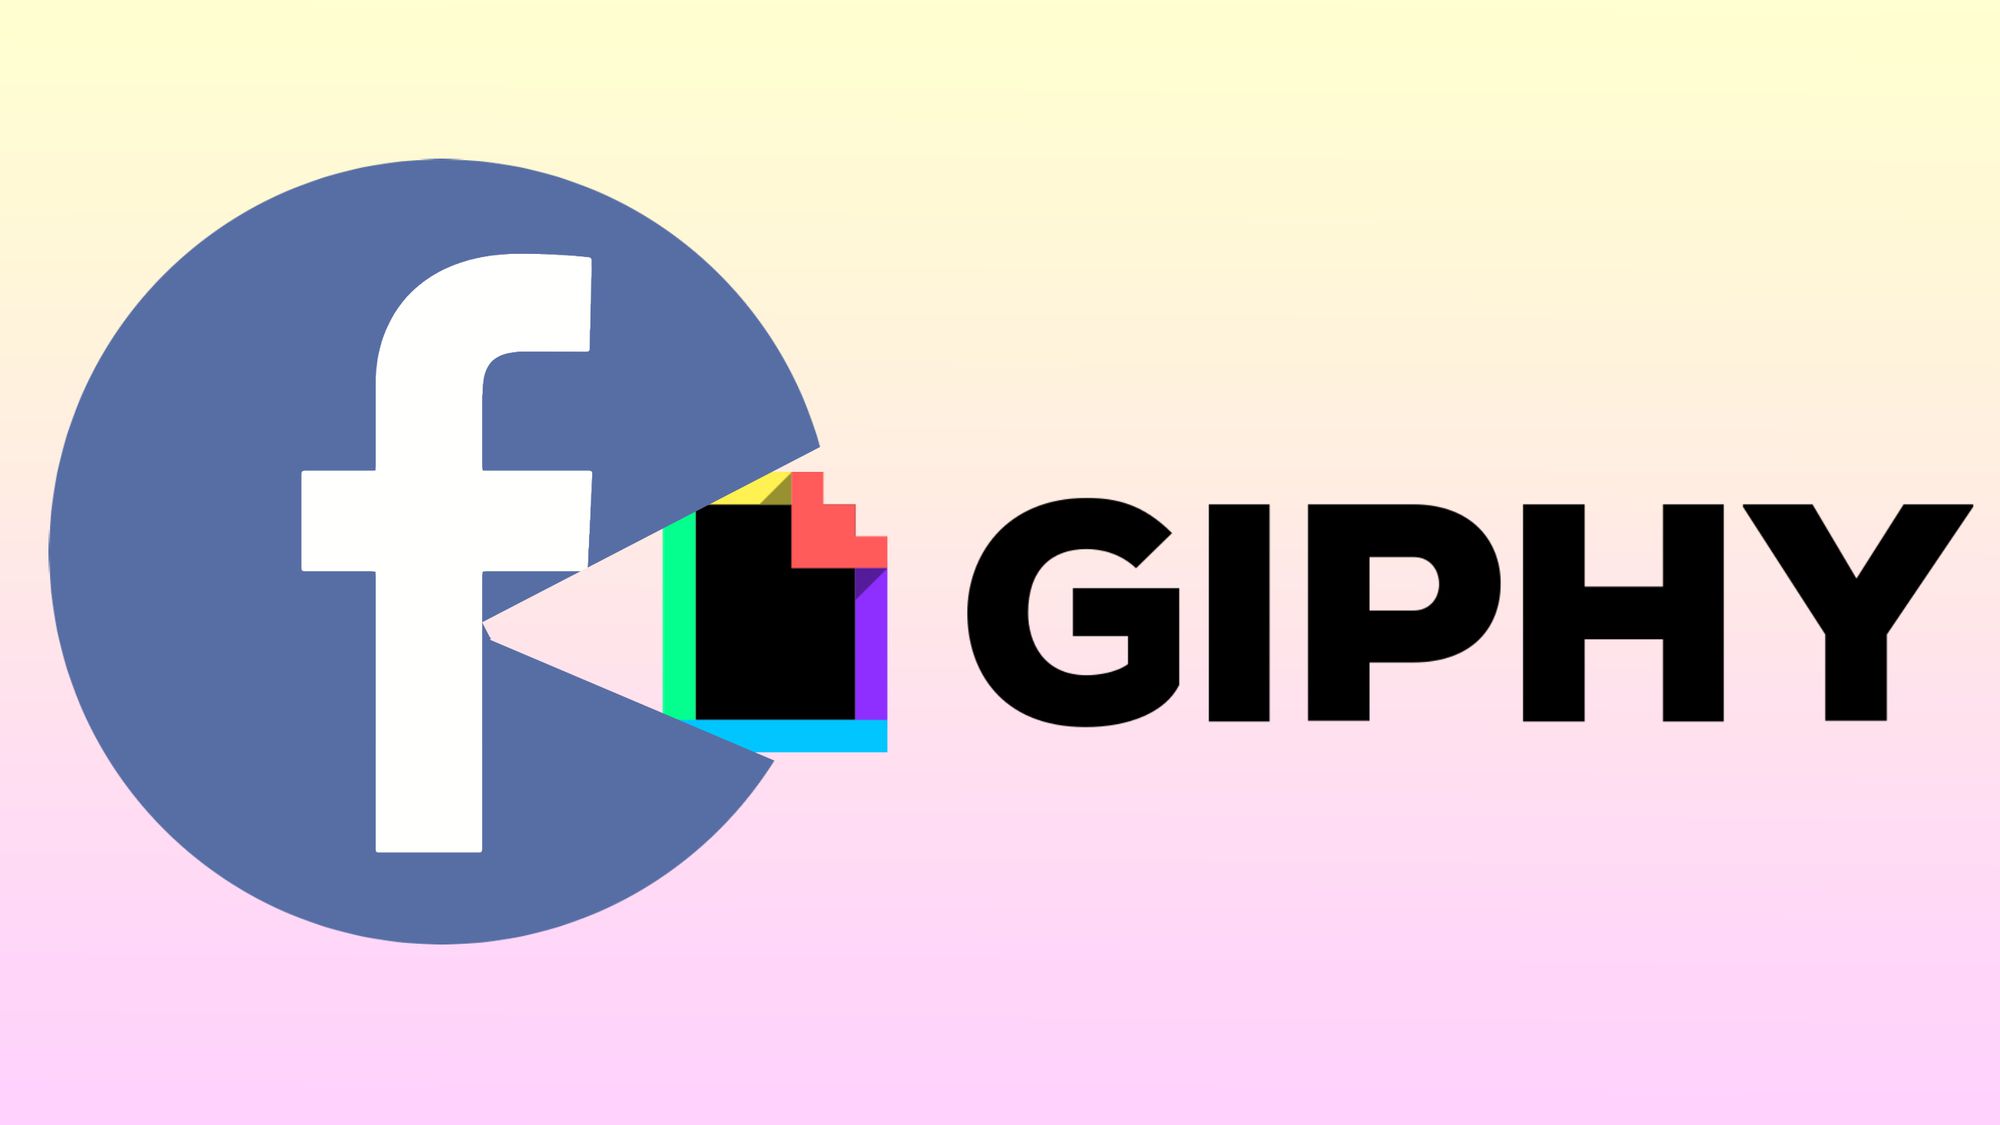 Facebook is buying Giphy to integrate it with Instagram